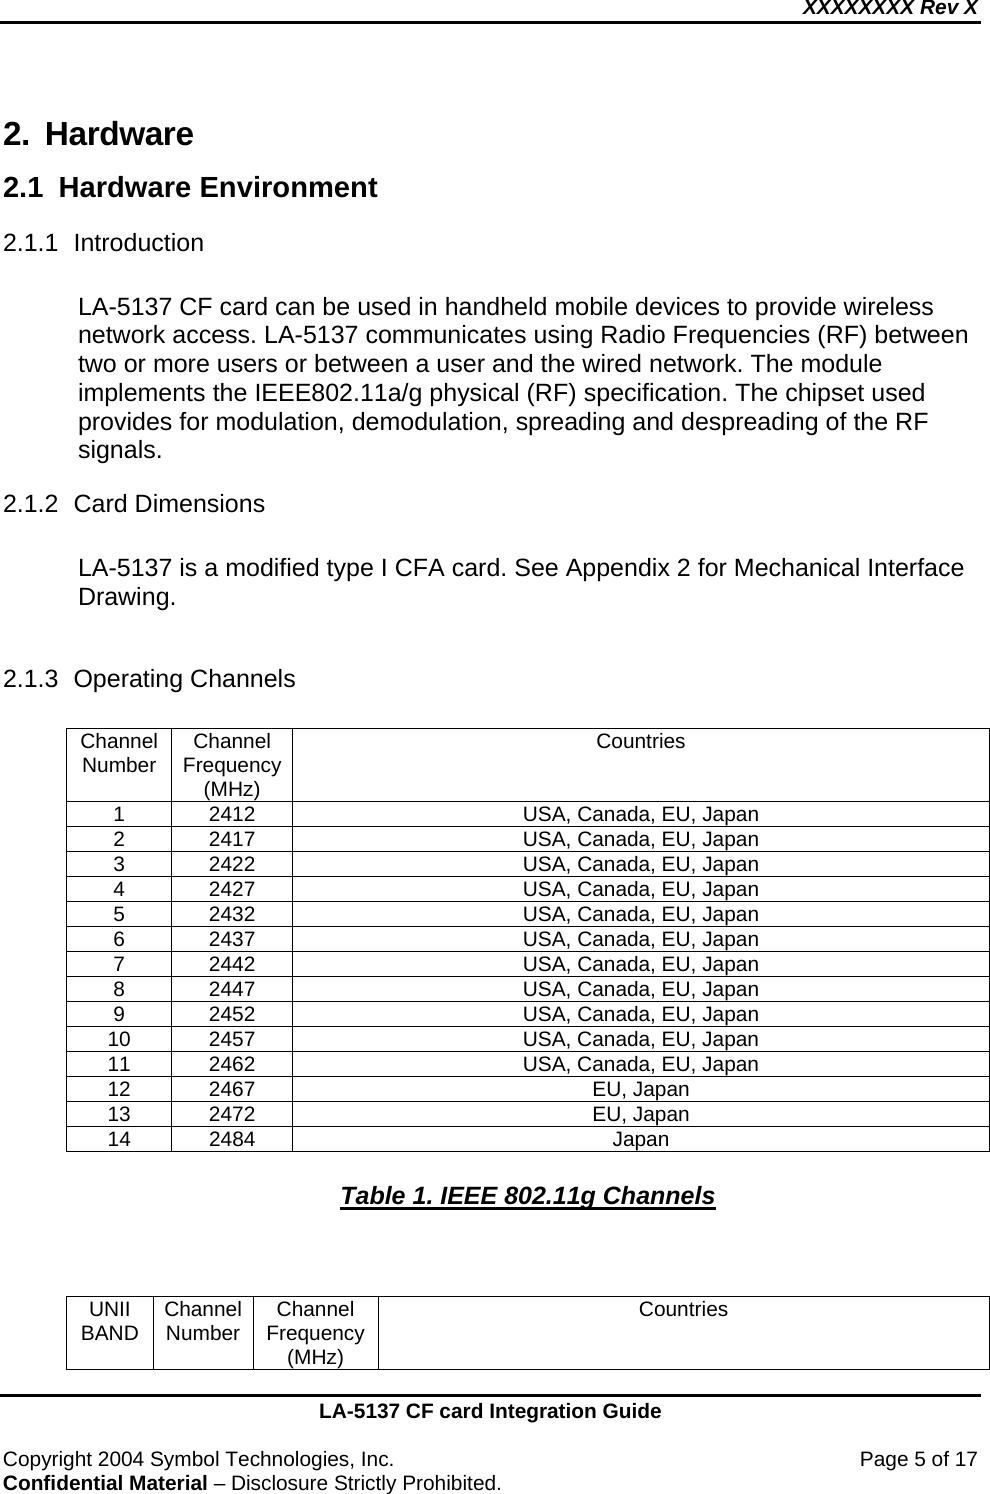 XXXXXXXX Rev X    LA-5137 CF card Integration Guide  Copyright 2004 Symbol Technologies, Inc.    Page 5 of 17 Confidential Material – Disclosure Strictly Prohibited. 2. Hardware  2.1 Hardware Environment 2.1.1 Introduction   LA-5137 CF card can be used in handheld mobile devices to provide wireless network access. LA-5137 communicates using Radio Frequencies (RF) between two or more users or between a user and the wired network. The module implements the IEEE802.11a/g physical (RF) specification. The chipset used provides for modulation, demodulation, spreading and despreading of the RF signals. 2.1.2 Card Dimensions  LA-5137 is a modified type I CFA card. See Appendix 2 for Mechanical Interface Drawing.  2.1.3 Operating Channels  Channel Number  Channel Frequency (MHz) Countries 1  2412  USA, Canada, EU, Japan 2  2417  USA, Canada, EU, Japan 3  2422  USA, Canada, EU, Japan 4  2427  USA, Canada, EU, Japan 5  2432  USA, Canada, EU, Japan 6  2437  USA, Canada, EU, Japan 7  2442  USA, Canada, EU, Japan 8  2447  USA, Canada, EU, Japan 9  2452  USA, Canada, EU, Japan 10  2457  USA, Canada, EU, Japan 11  2462  USA, Canada, EU, Japan 12 2467  EU, Japan 13 2472  EU, Japan 14 2484  Japan  Table 1. IEEE 802.11g Channels    UNII BAND  Channel Number  Channel Frequency (MHz) Countries 